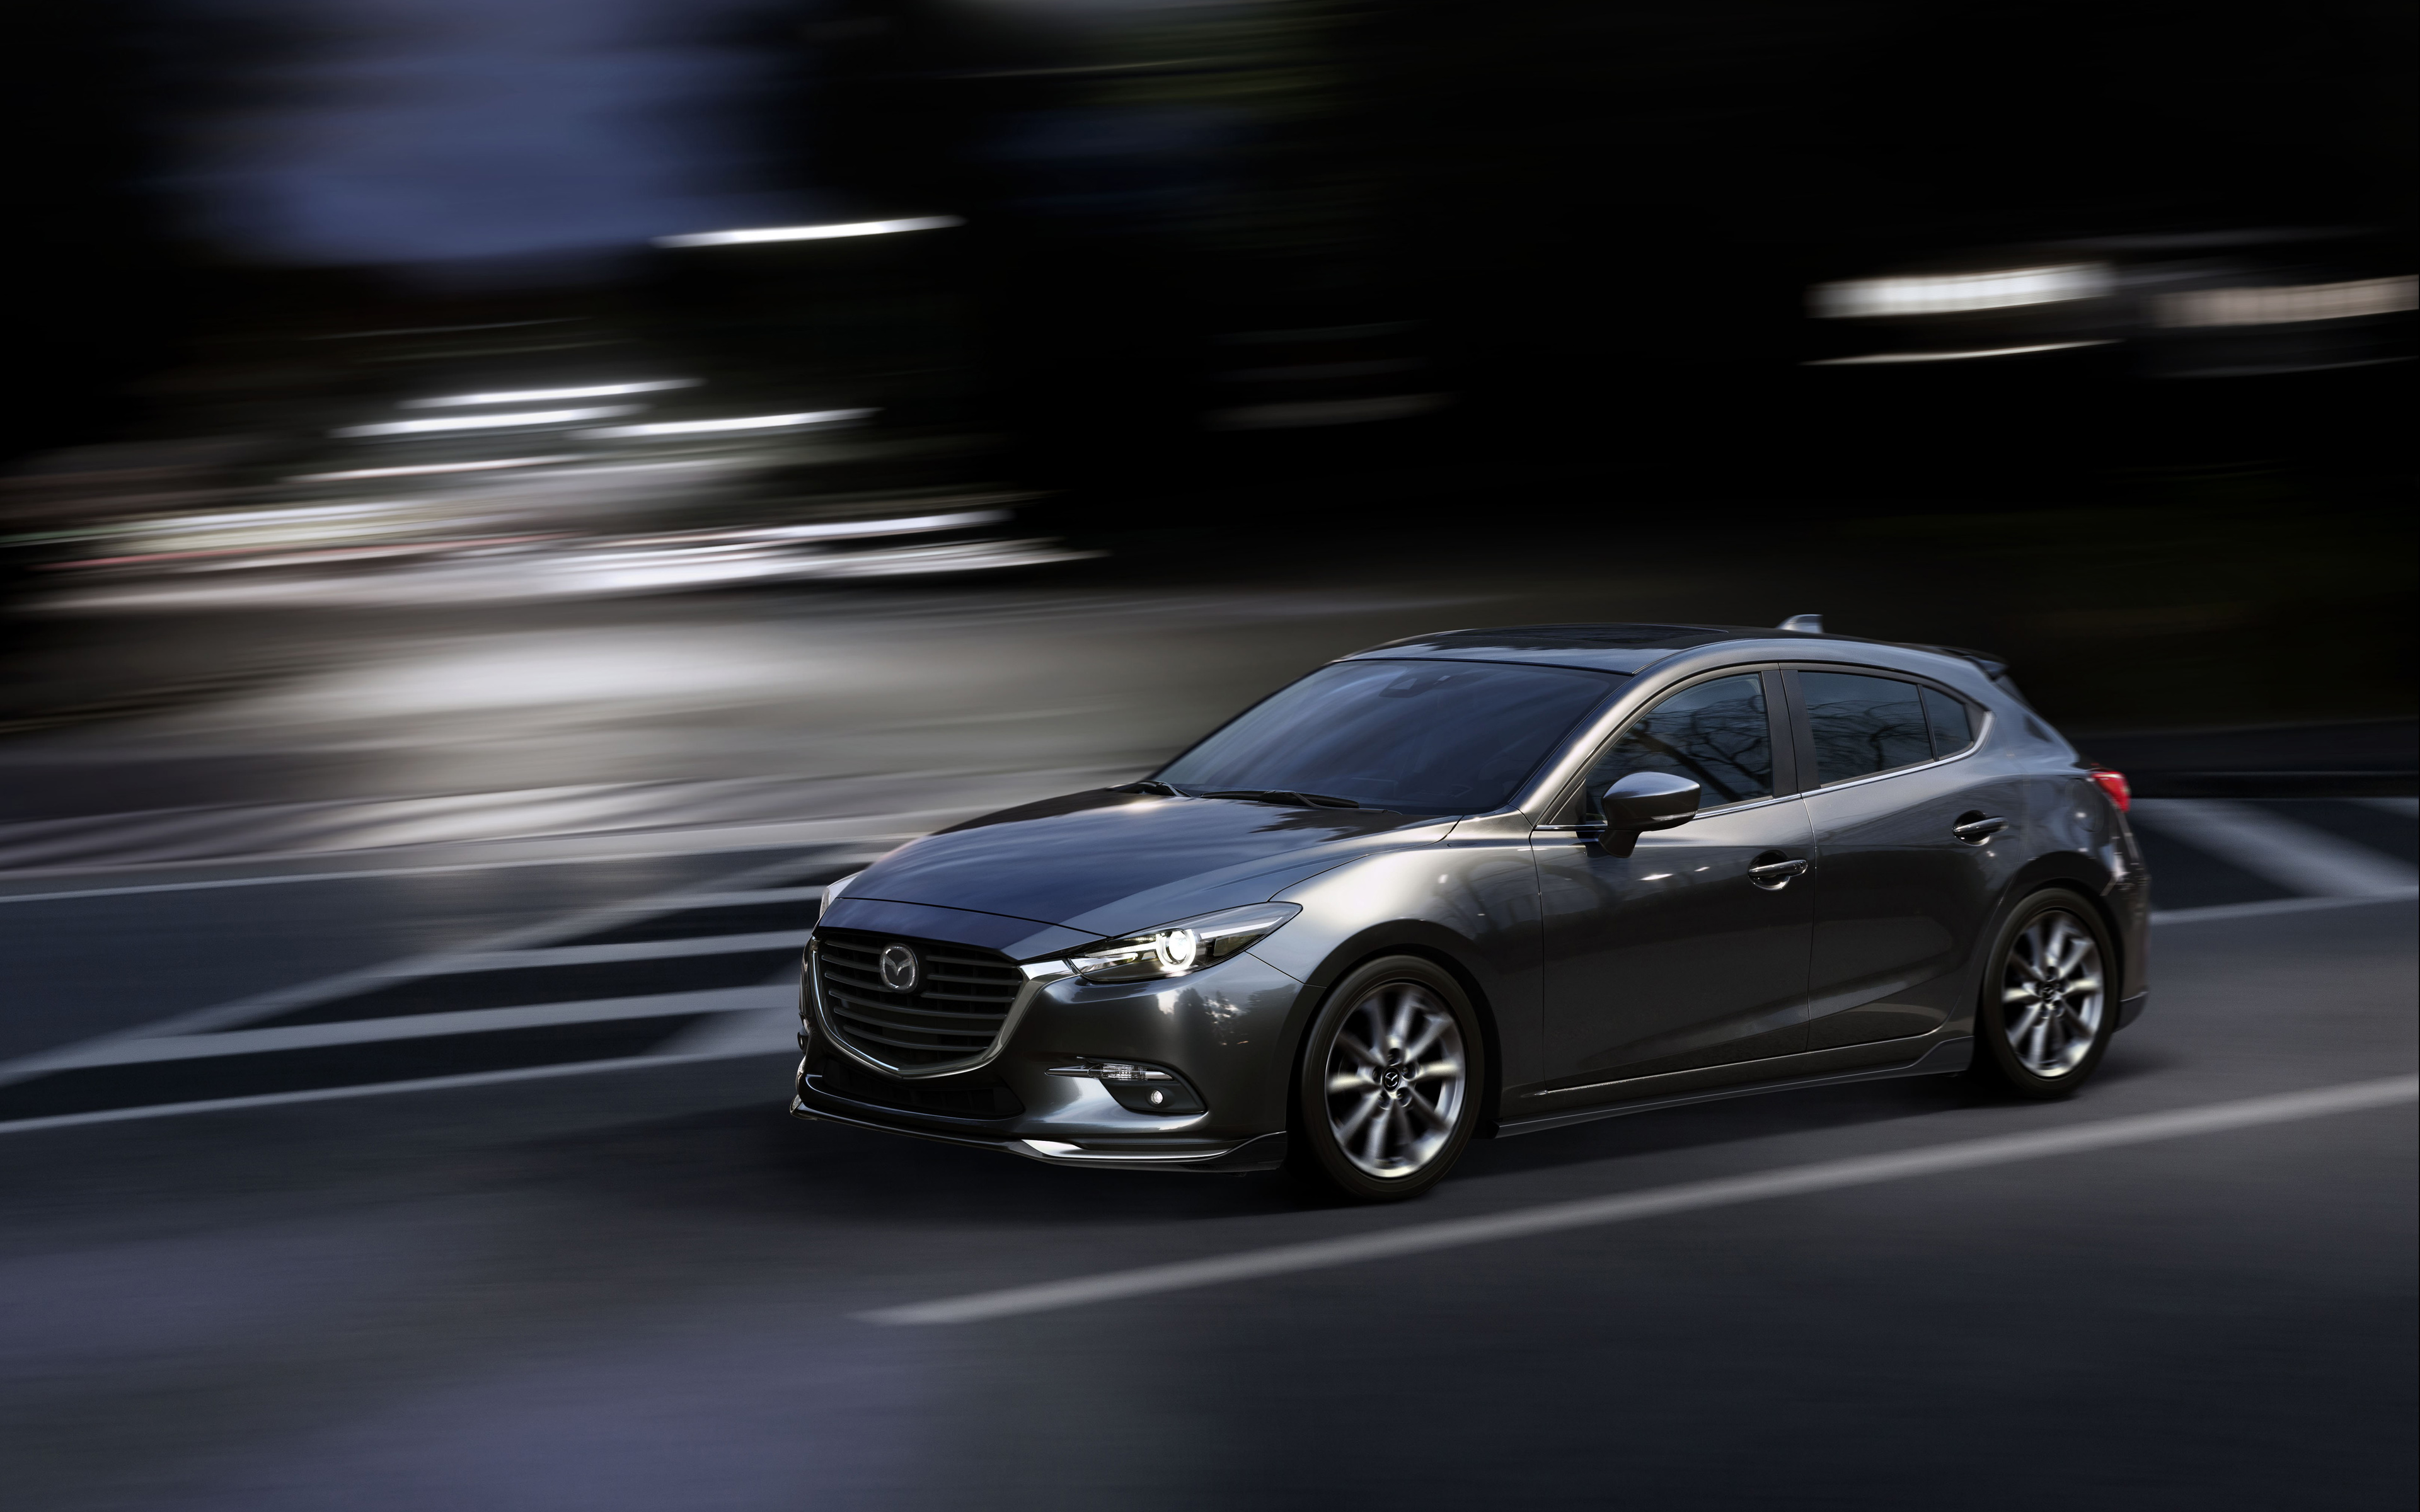 Download wallpapers Mazda3 Hatchback, 4k, motion blur, 2018 cars, Mazda 3,  japanese cars, Mazda for desktop with resolution 3840x2400. High Quality HD  pictures wallpapers